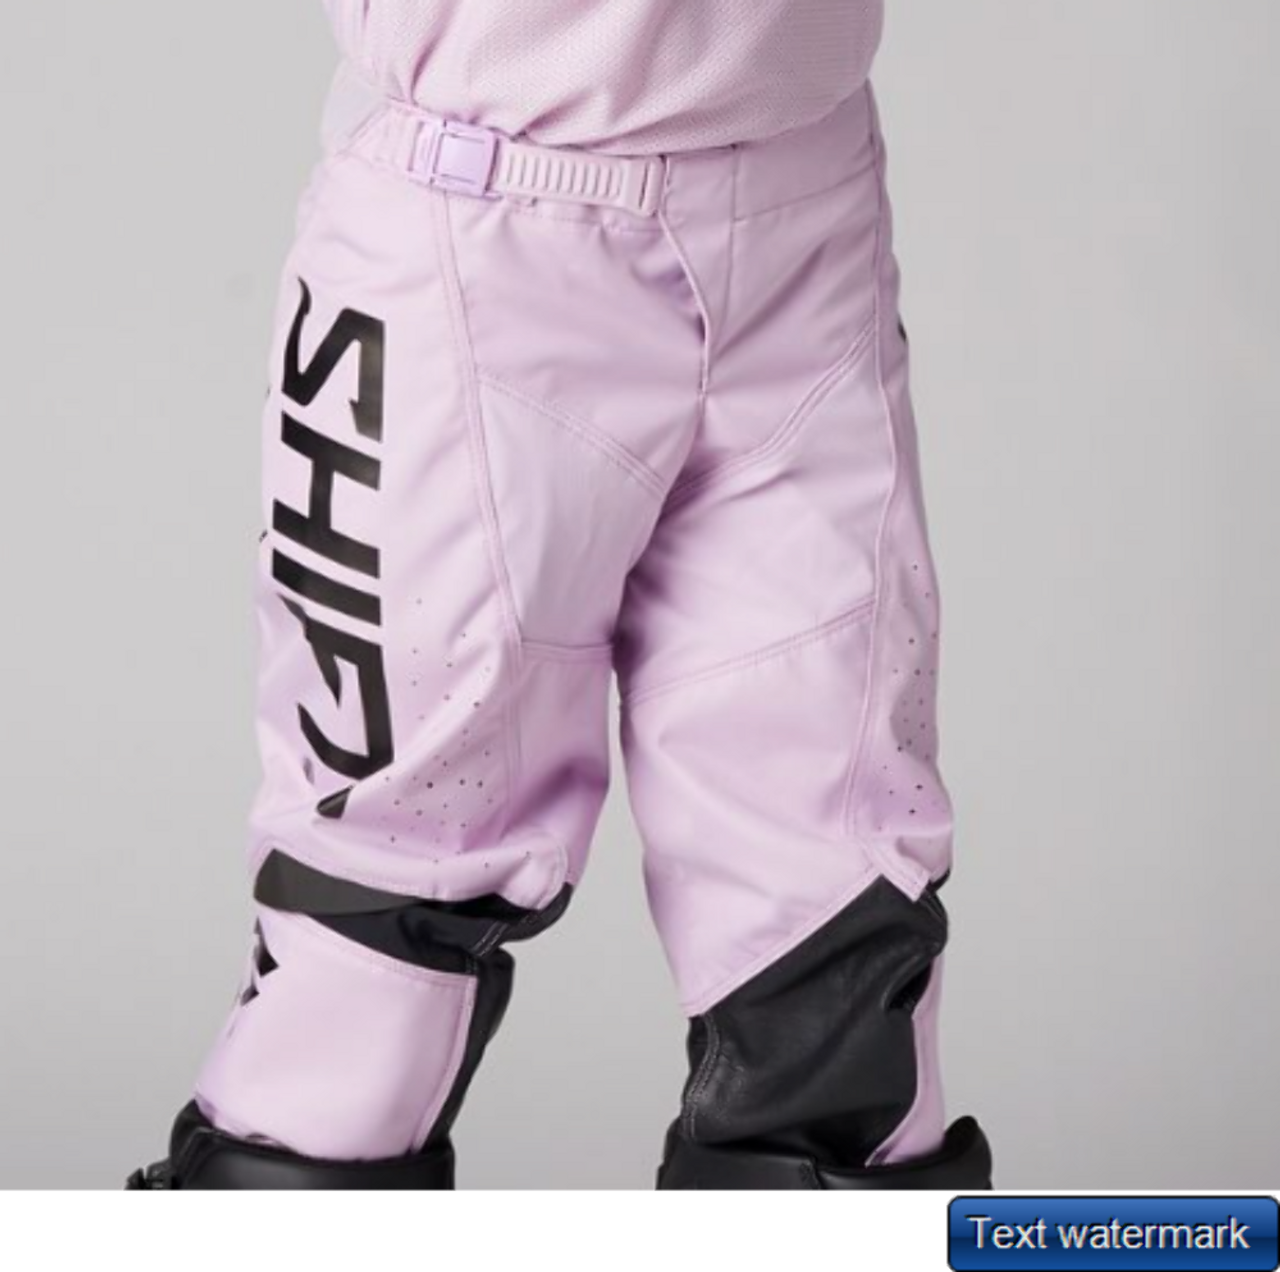 https://cdn11.bigcommerce.com/s-njwmv1/images/stencil/1280x1280/products/357878/2069153/th40420-shift-mx21-white-label-trac-youth-motocross-pant-26384-170-26-size-26-pink__12977.1686224174.png?c=2